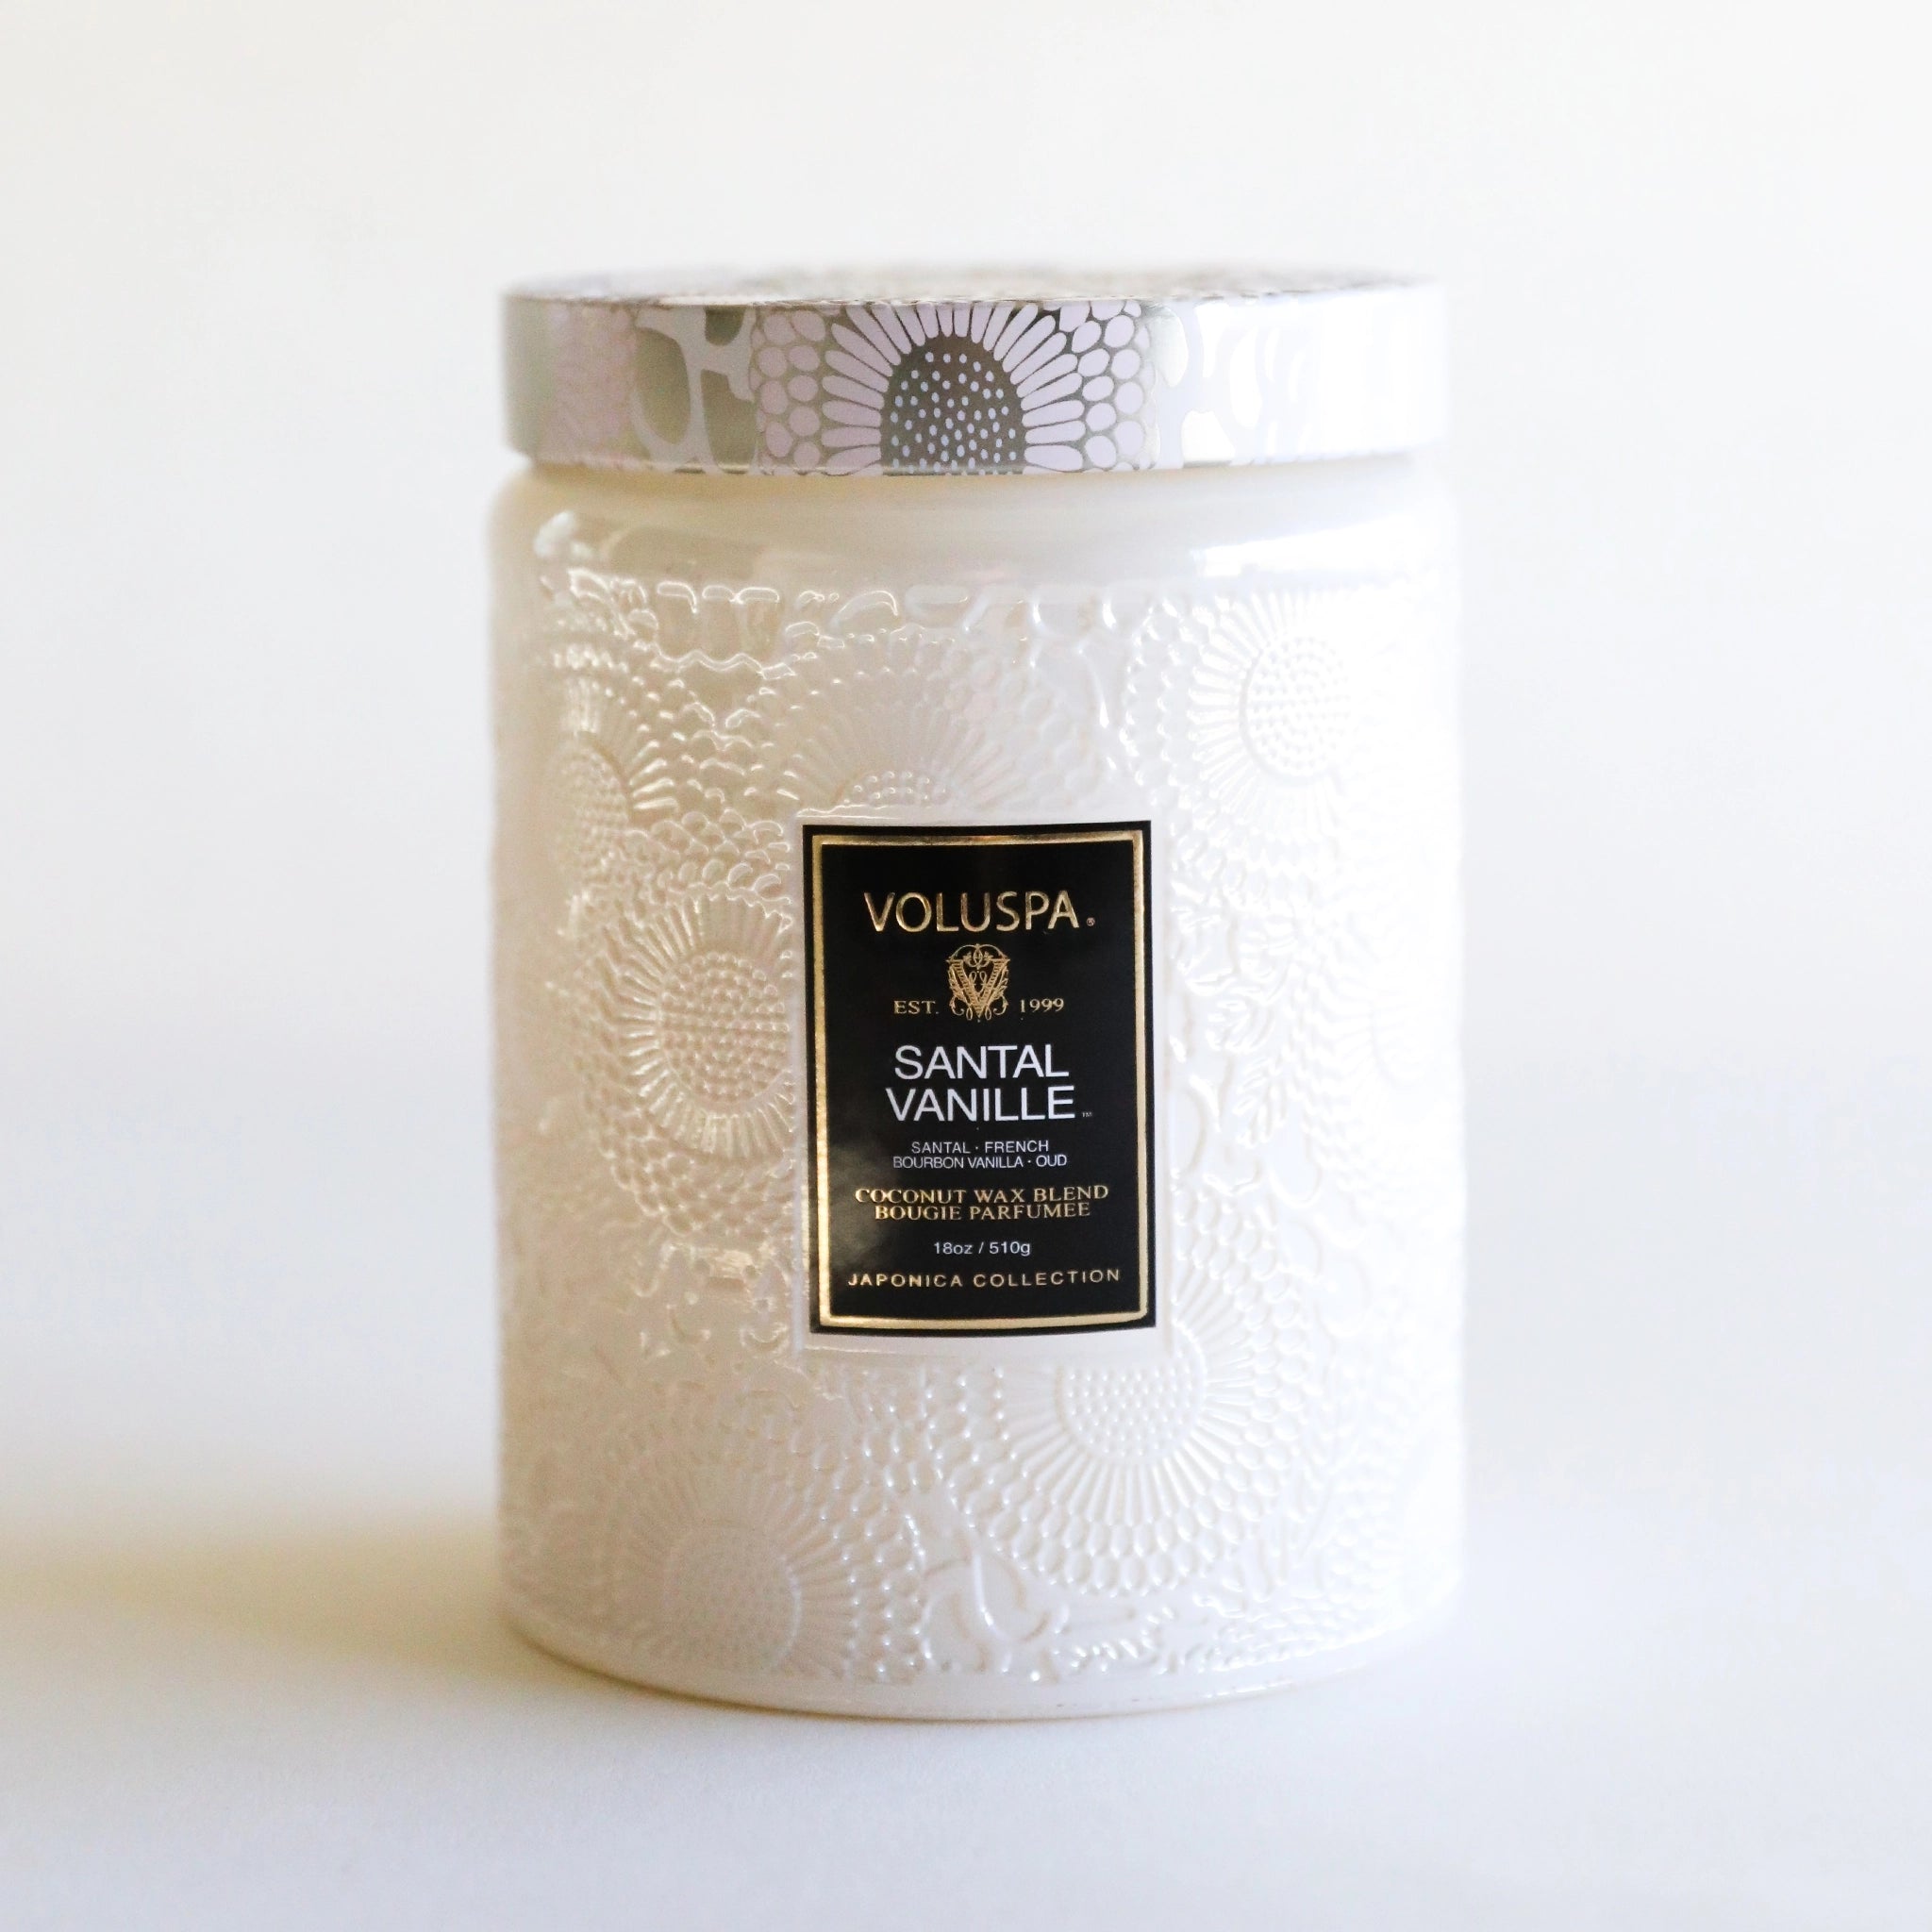 In front of a white background is a large light pink glass jar. The glass jar has a floral pattern all over it. In the middle is a black rectangular sticker with gold text at the top that reads ‘voluspa.’ Below is white text that reads ‘santal vanille.’ On top of the candle is a roun tin lid. The lid has a light pink, silver and lavender flower pattern on it.